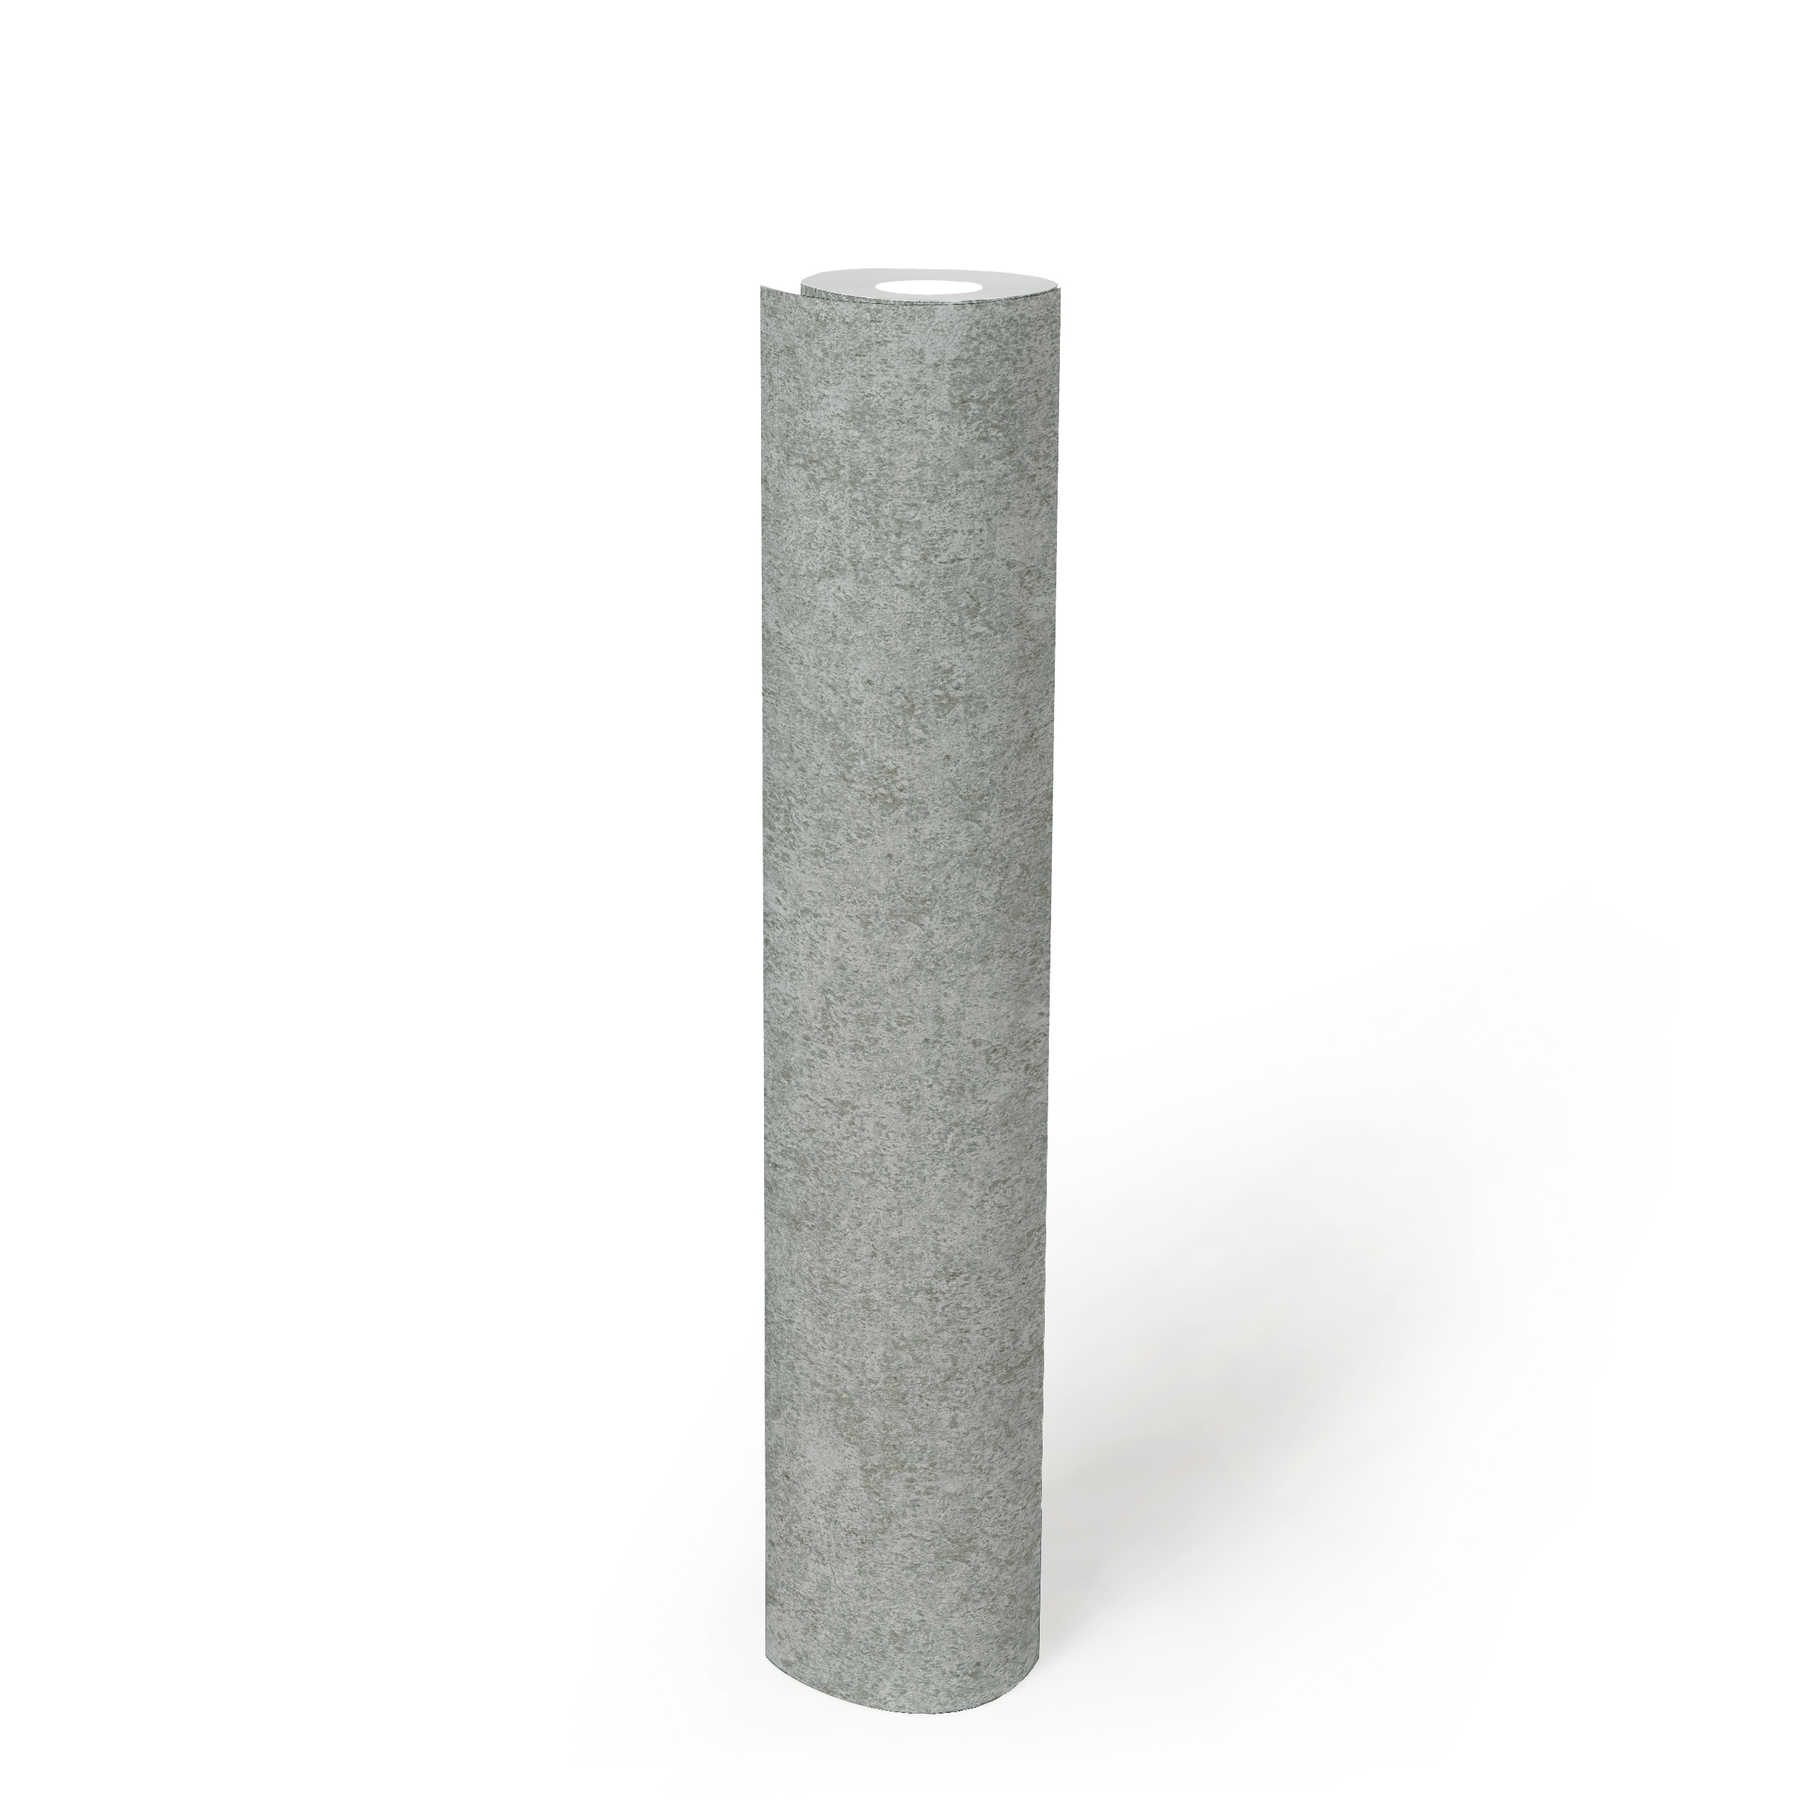             Plain wallpaper grey with mottled natural stone look
        